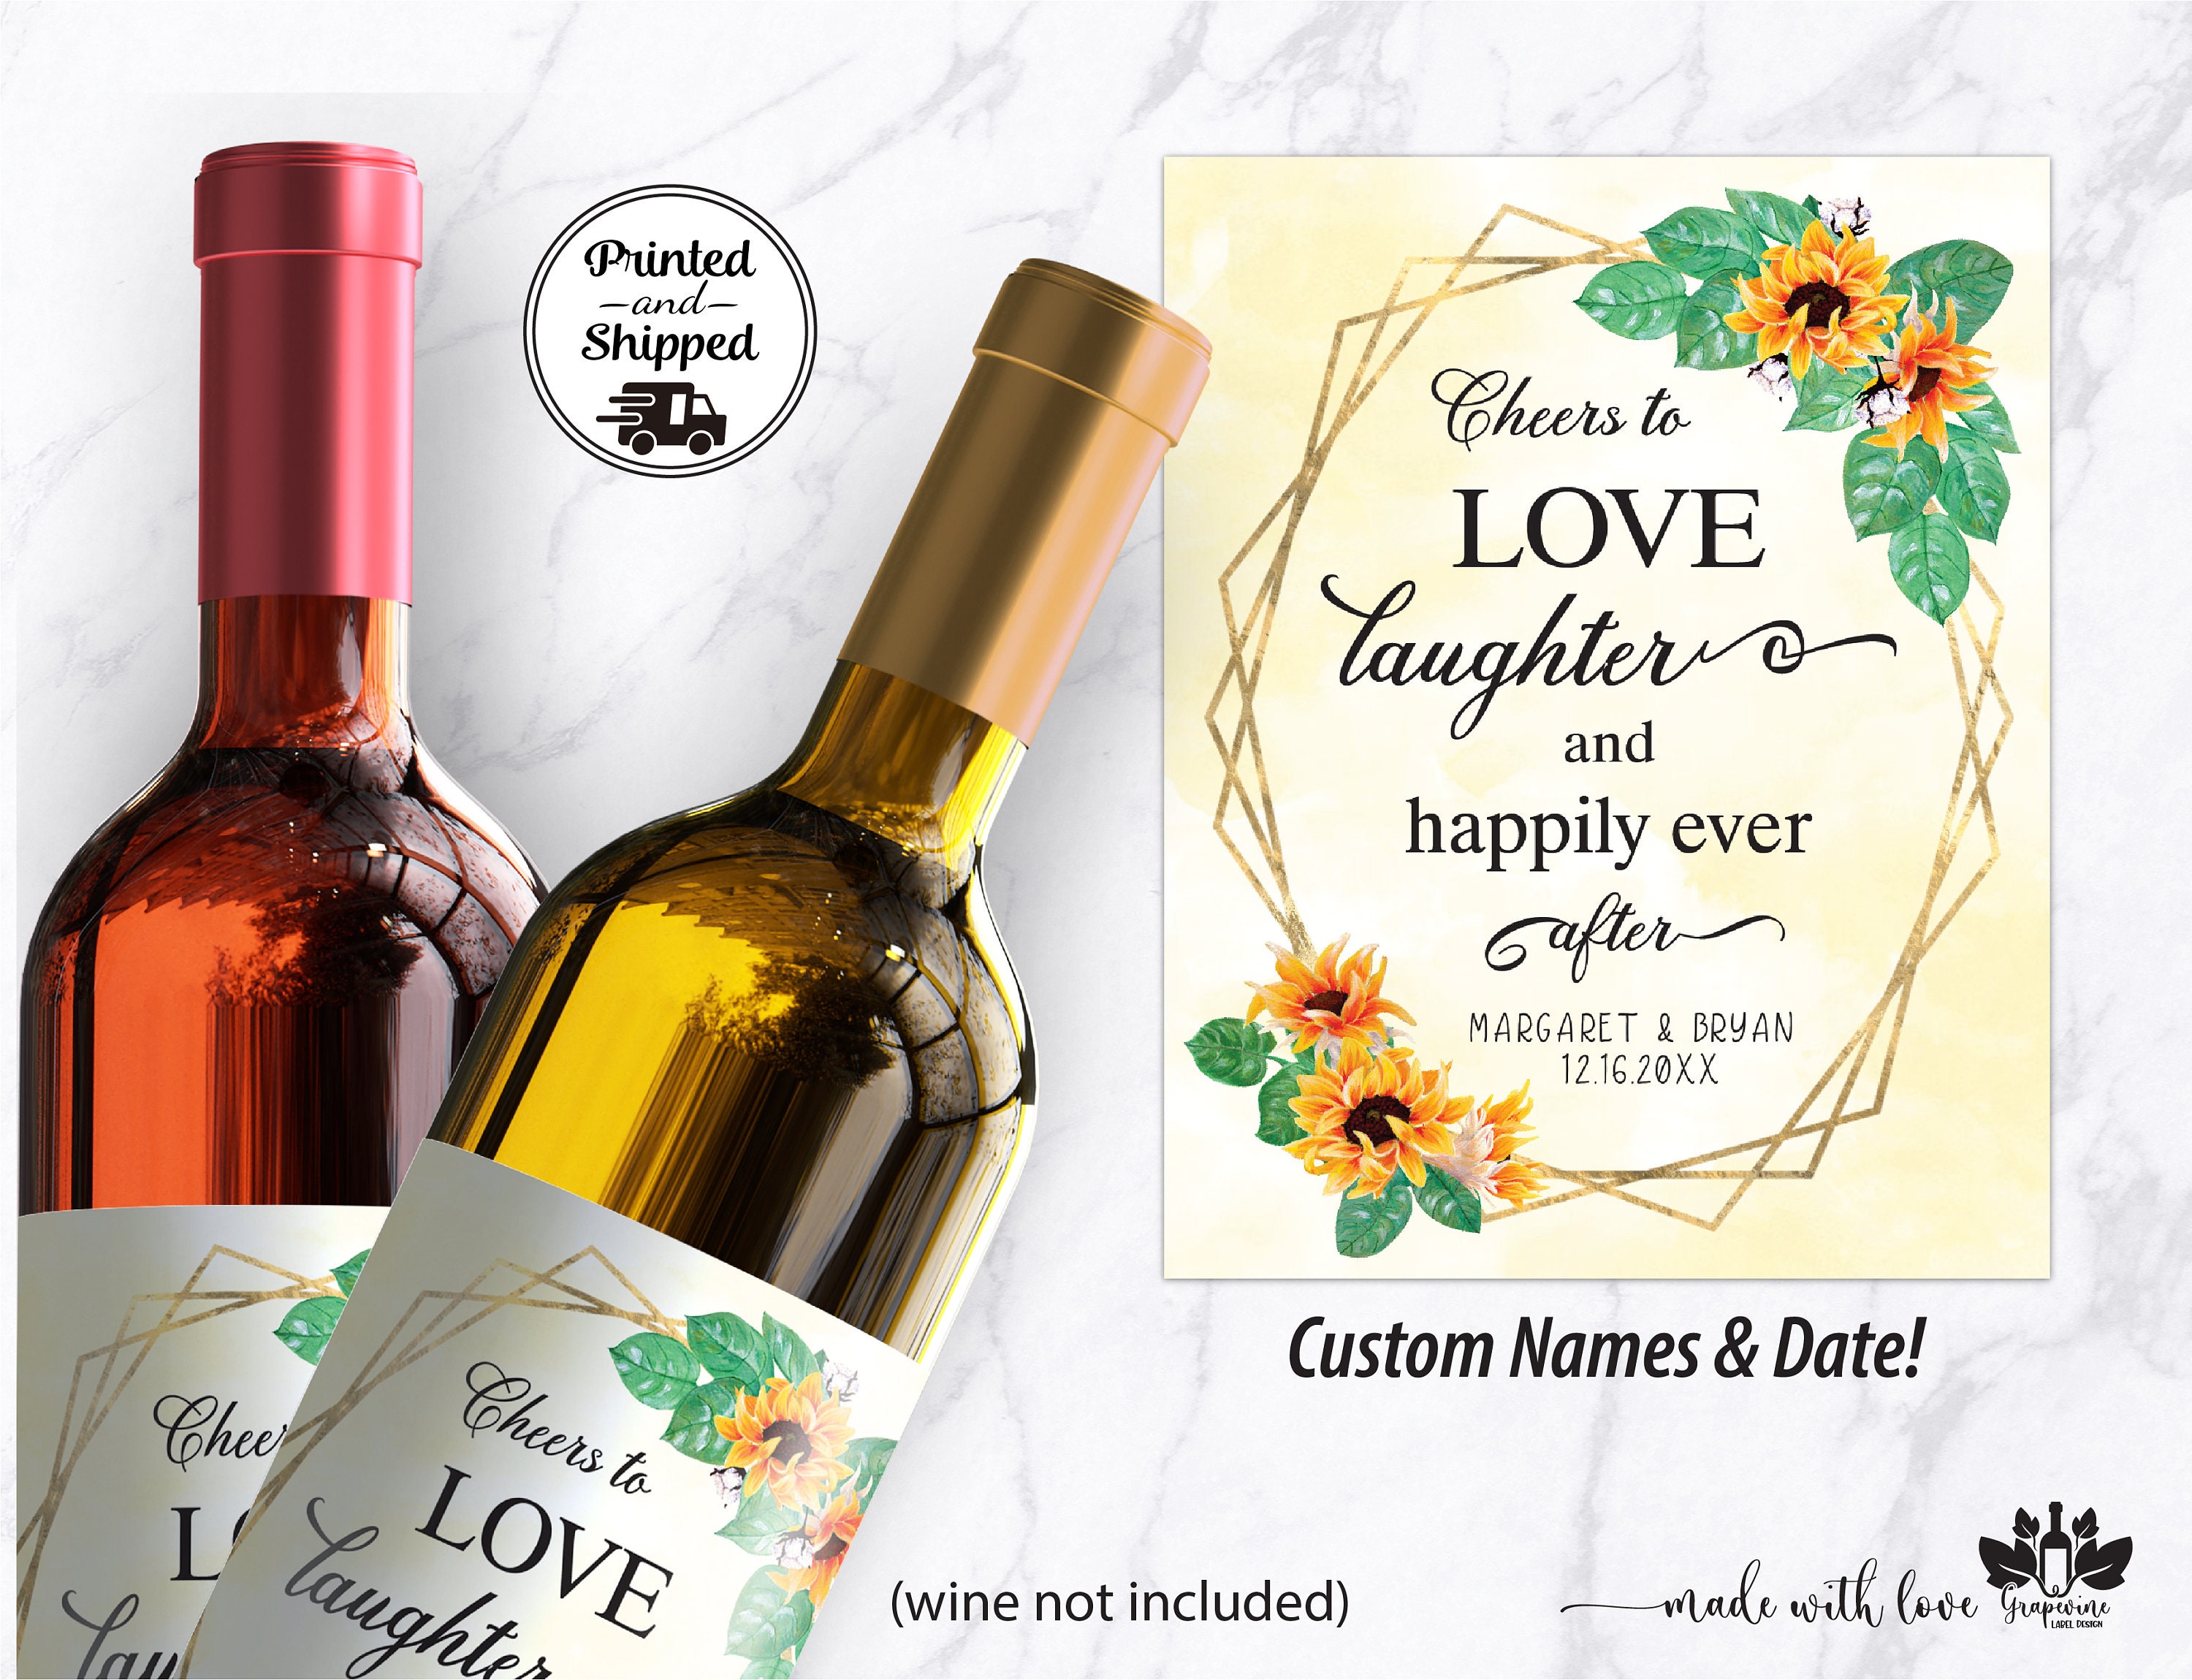 Personalized Cheers to Love Laughter and Happily Ever After Wedding Table Wine Decor WATERPROOF Label Gift for the Couple Wine Label